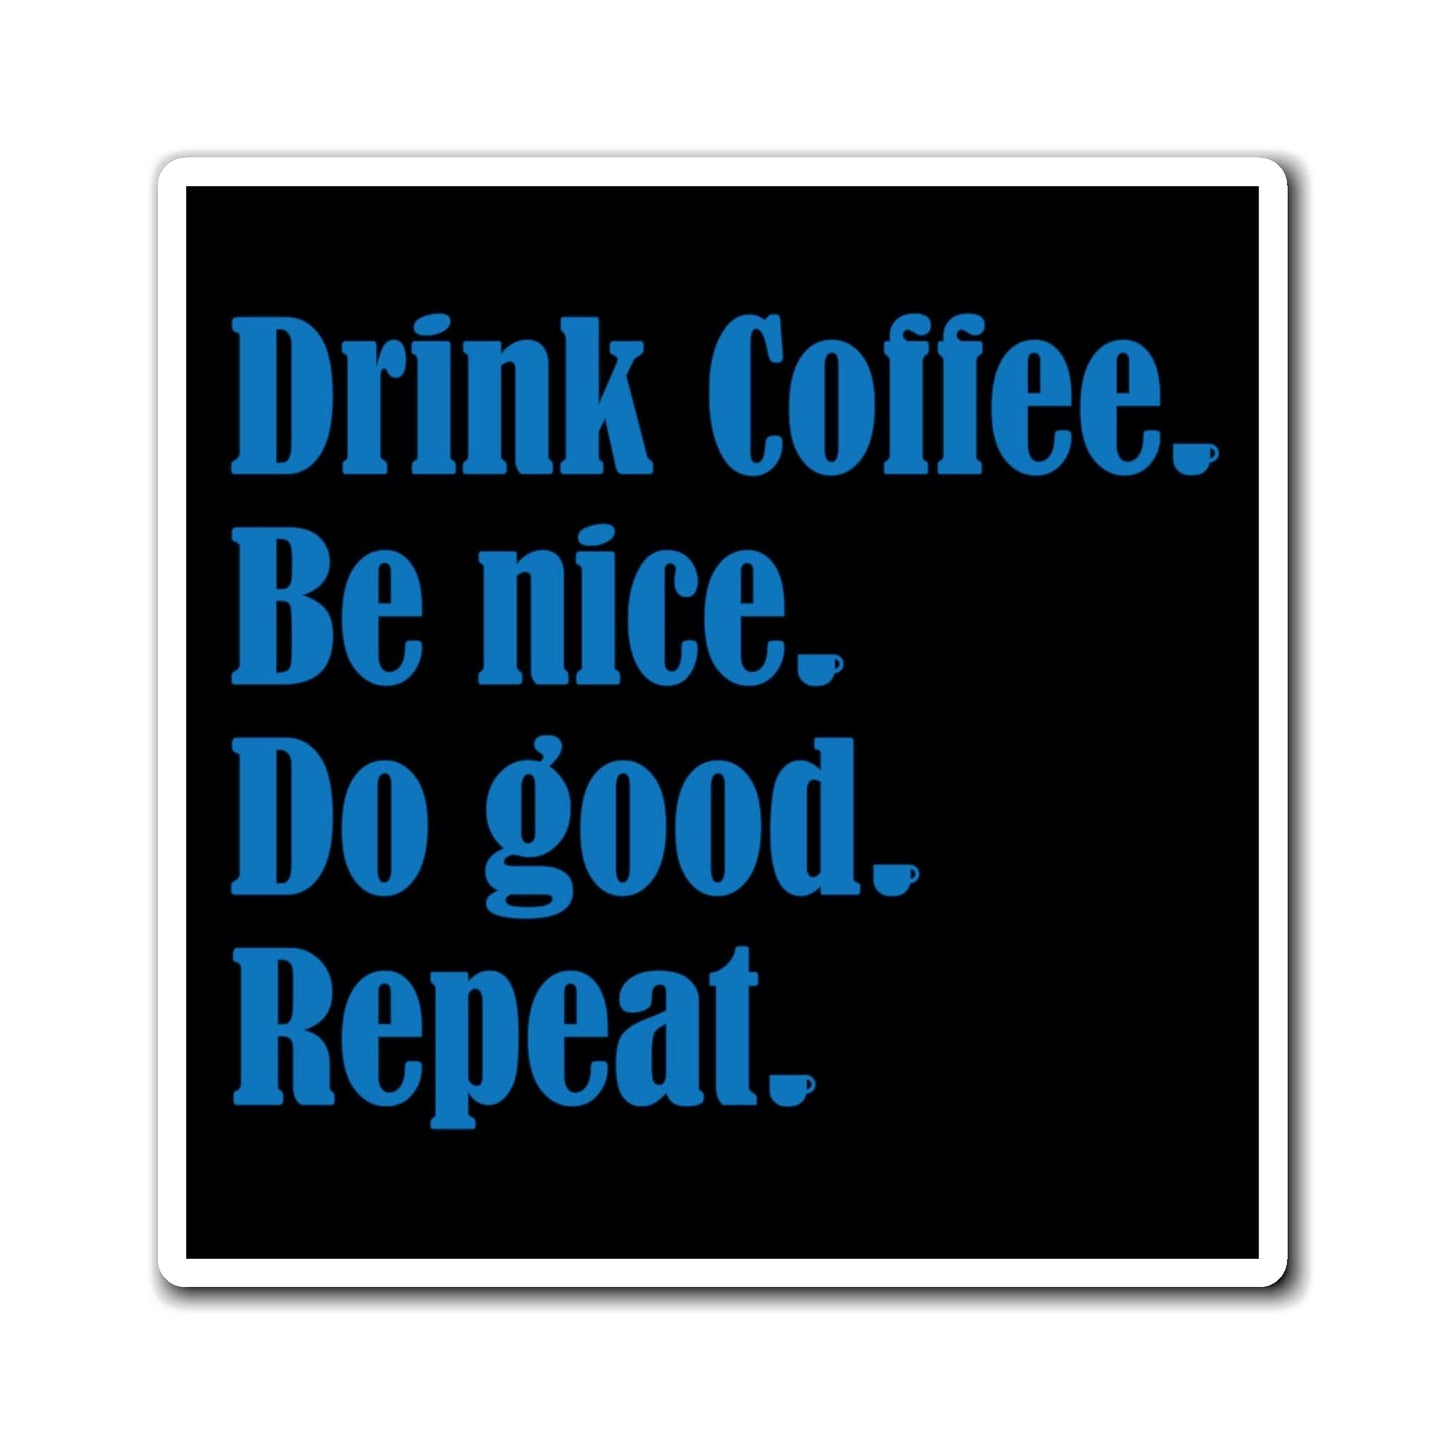 Good Bean Gifts "Drink Coffee, Be Nice, Do Good, Repeat" Magnets 4" × 4"